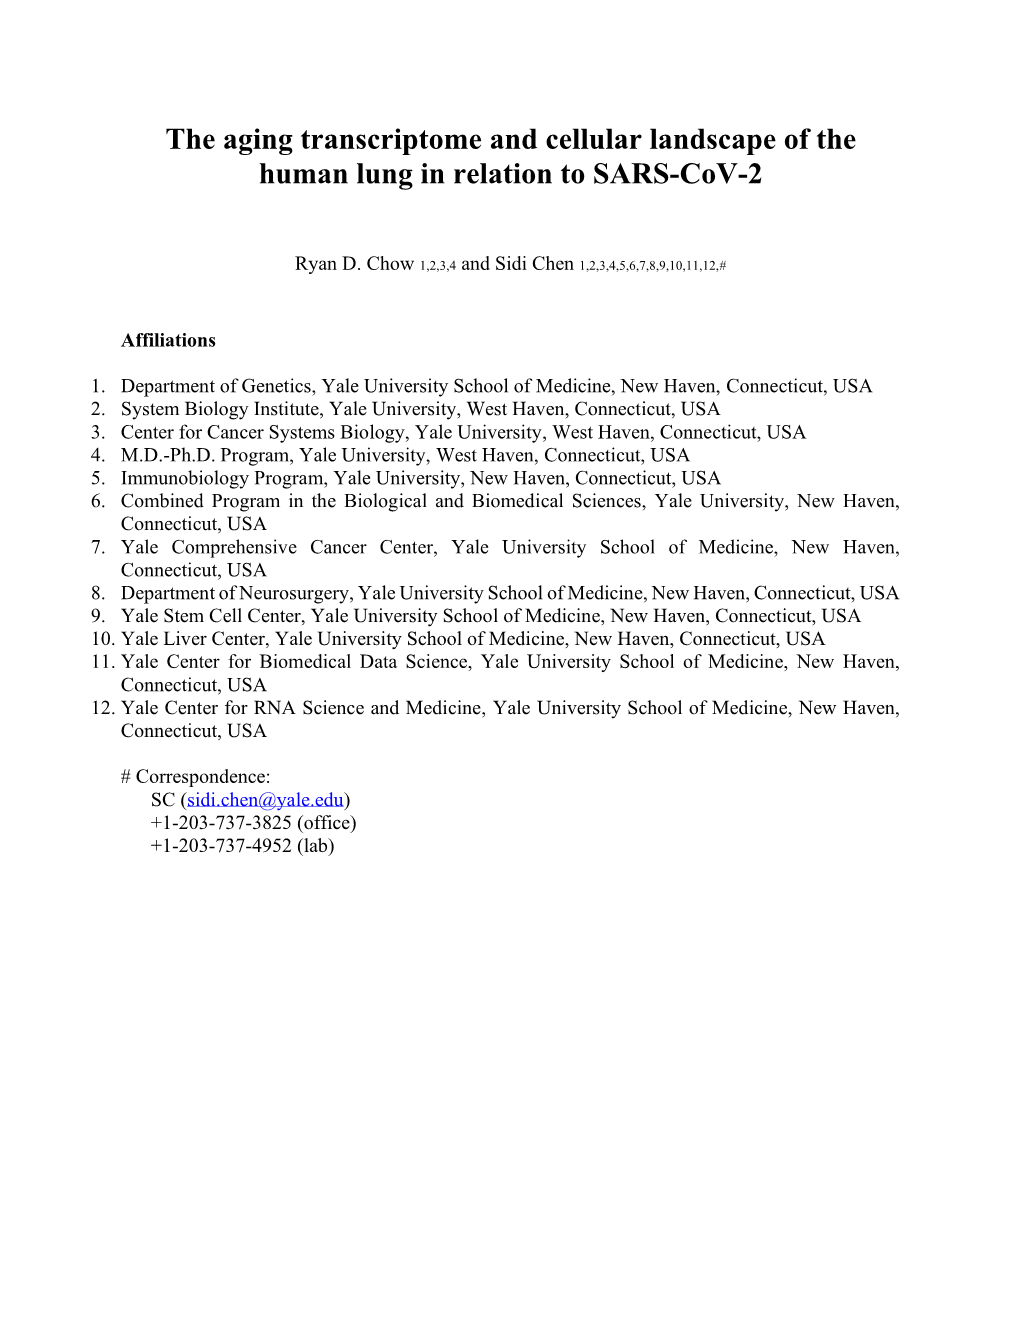 The Aging Transcriptome and Cellular Landscape of the Human Lung in Relation to SARS-Cov-2